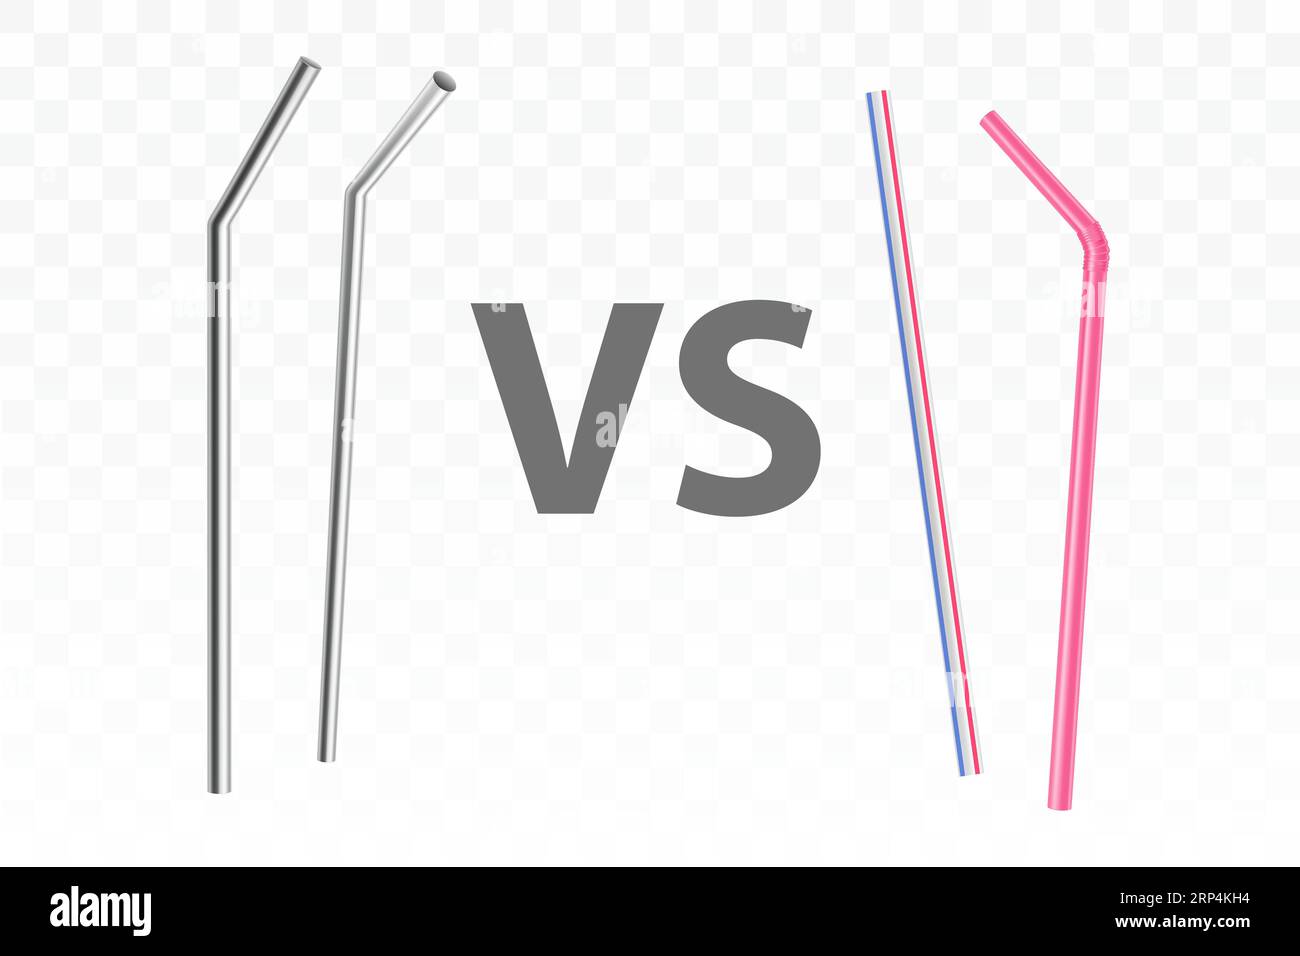 https://c8.alamy.com/comp/2RP4KH4/reusable-metal-drinking-straws-versus-disposable-plastic-concept-ecological-stainless-steel-cocktail-straws-comparison-to-old-polluting-environme-2RP4KH4.jpg